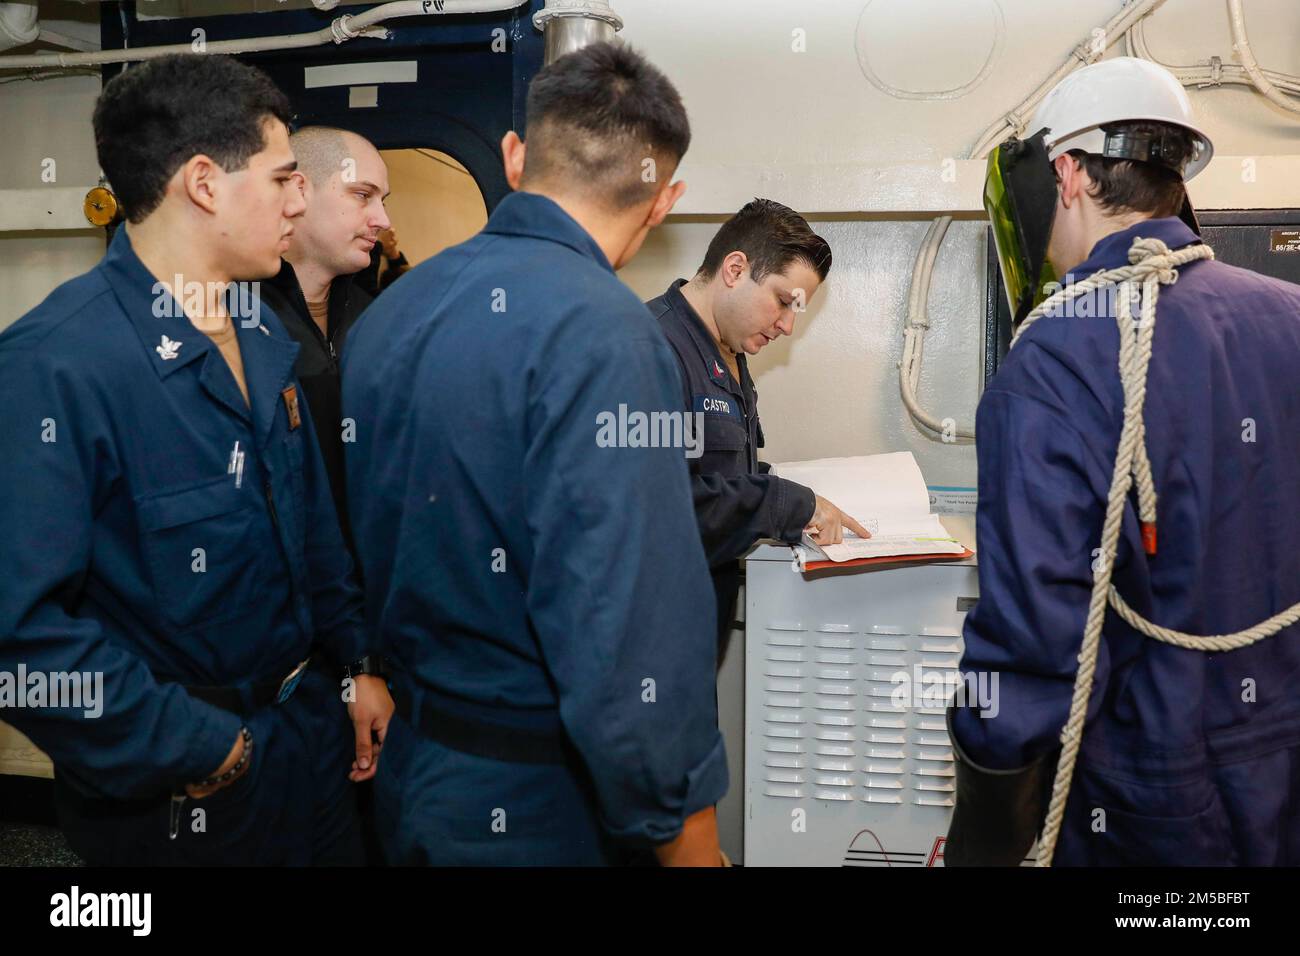 PHILIPPINE SEA (Feb. 22, 2022) Sailors review the aircraft electrical service station (AESS) technical manual prior to conducting maintenance aboard the Nimitz-class aircraft carrier USS Abraham Lincoln (CVN 72). Abraham Lincoln Strike Group is on a scheduled deployment in the U.S. 7th Fleet area of operations to enhance interoperability through alliances and partnerships while serving as a ready-response force in support of a free and open Indo-Pacific region. Stock Photo